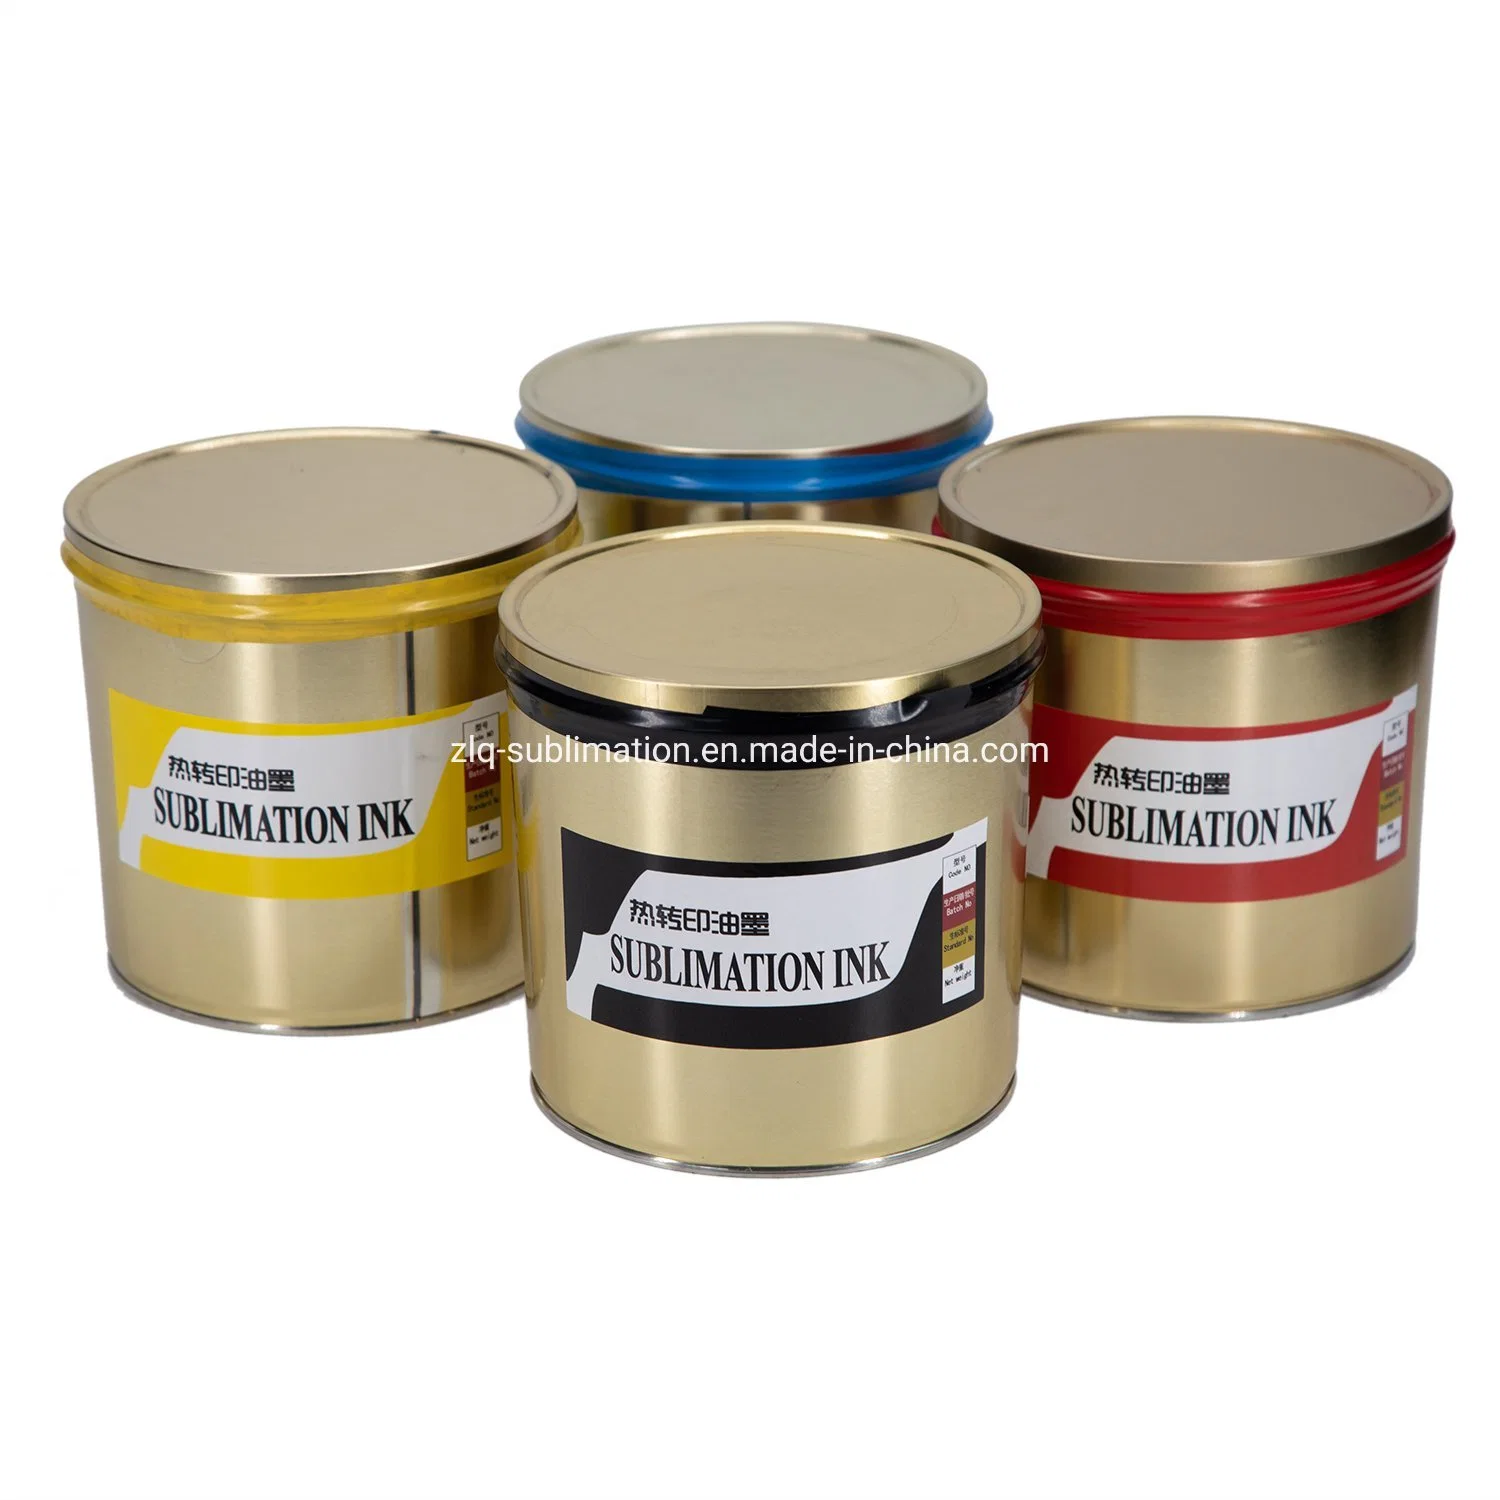 Sublimation Ink for Offset Printing About Ink Offset Printing Sublimation